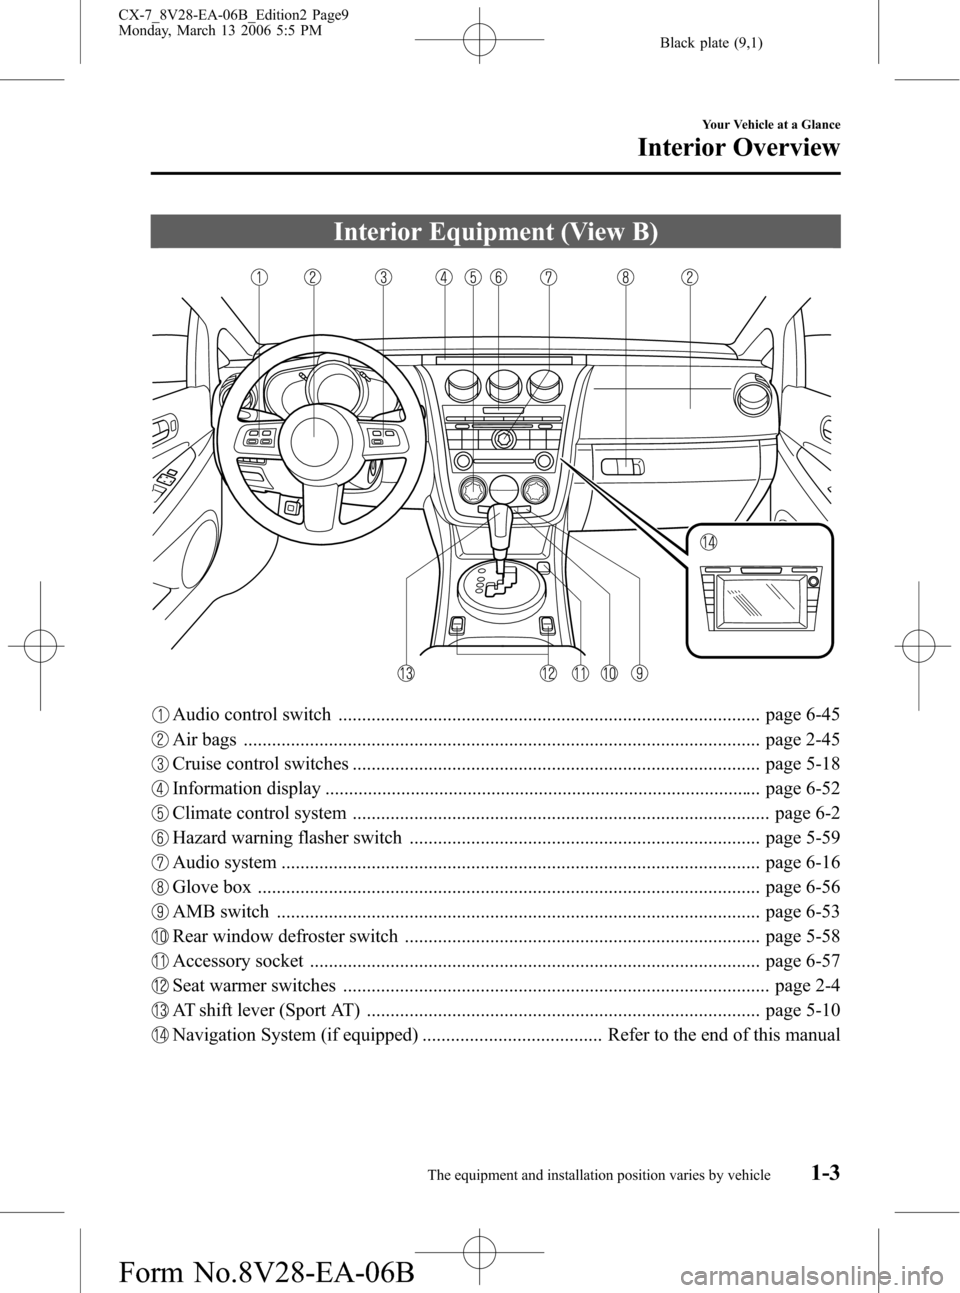 MAZDA MODEL CX-7 2007  Owners Manual (in English) Black plate (9,1)
Interior Equipment (View B)
Audio control switch ......................................................................................... page 6-45
Air bags ........................